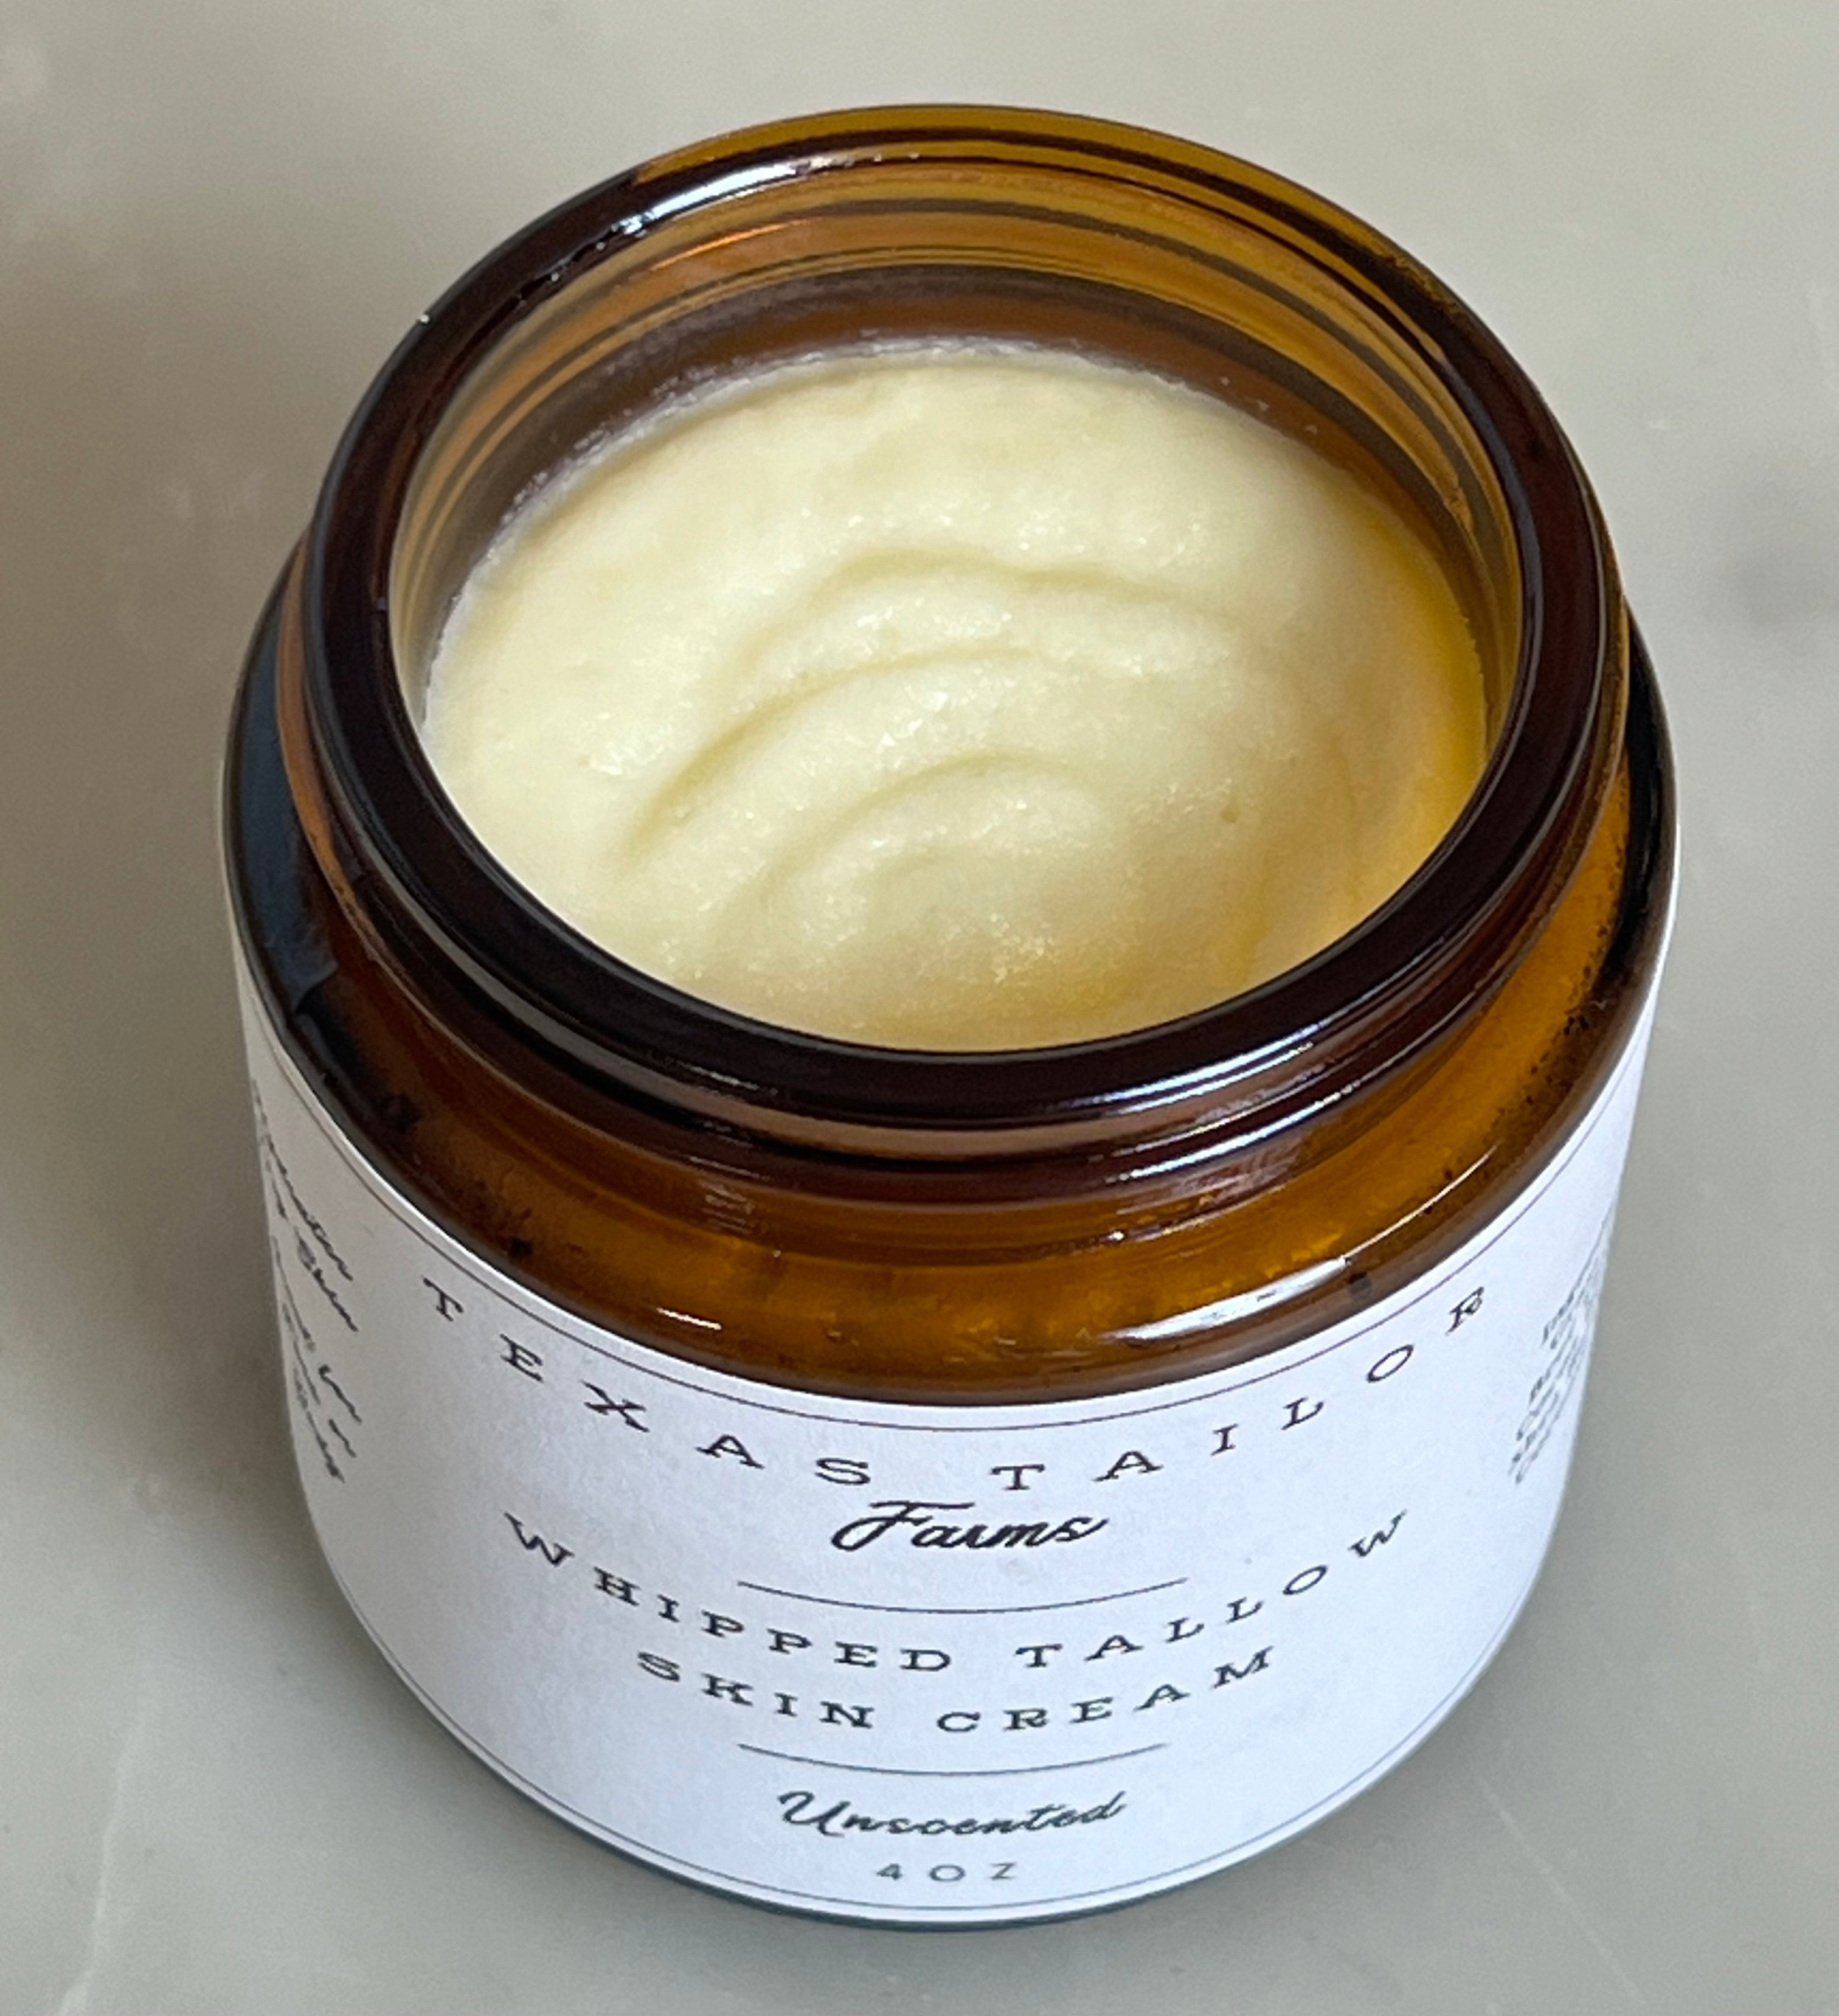 Whipped Tallow Skin Cream- Unscented